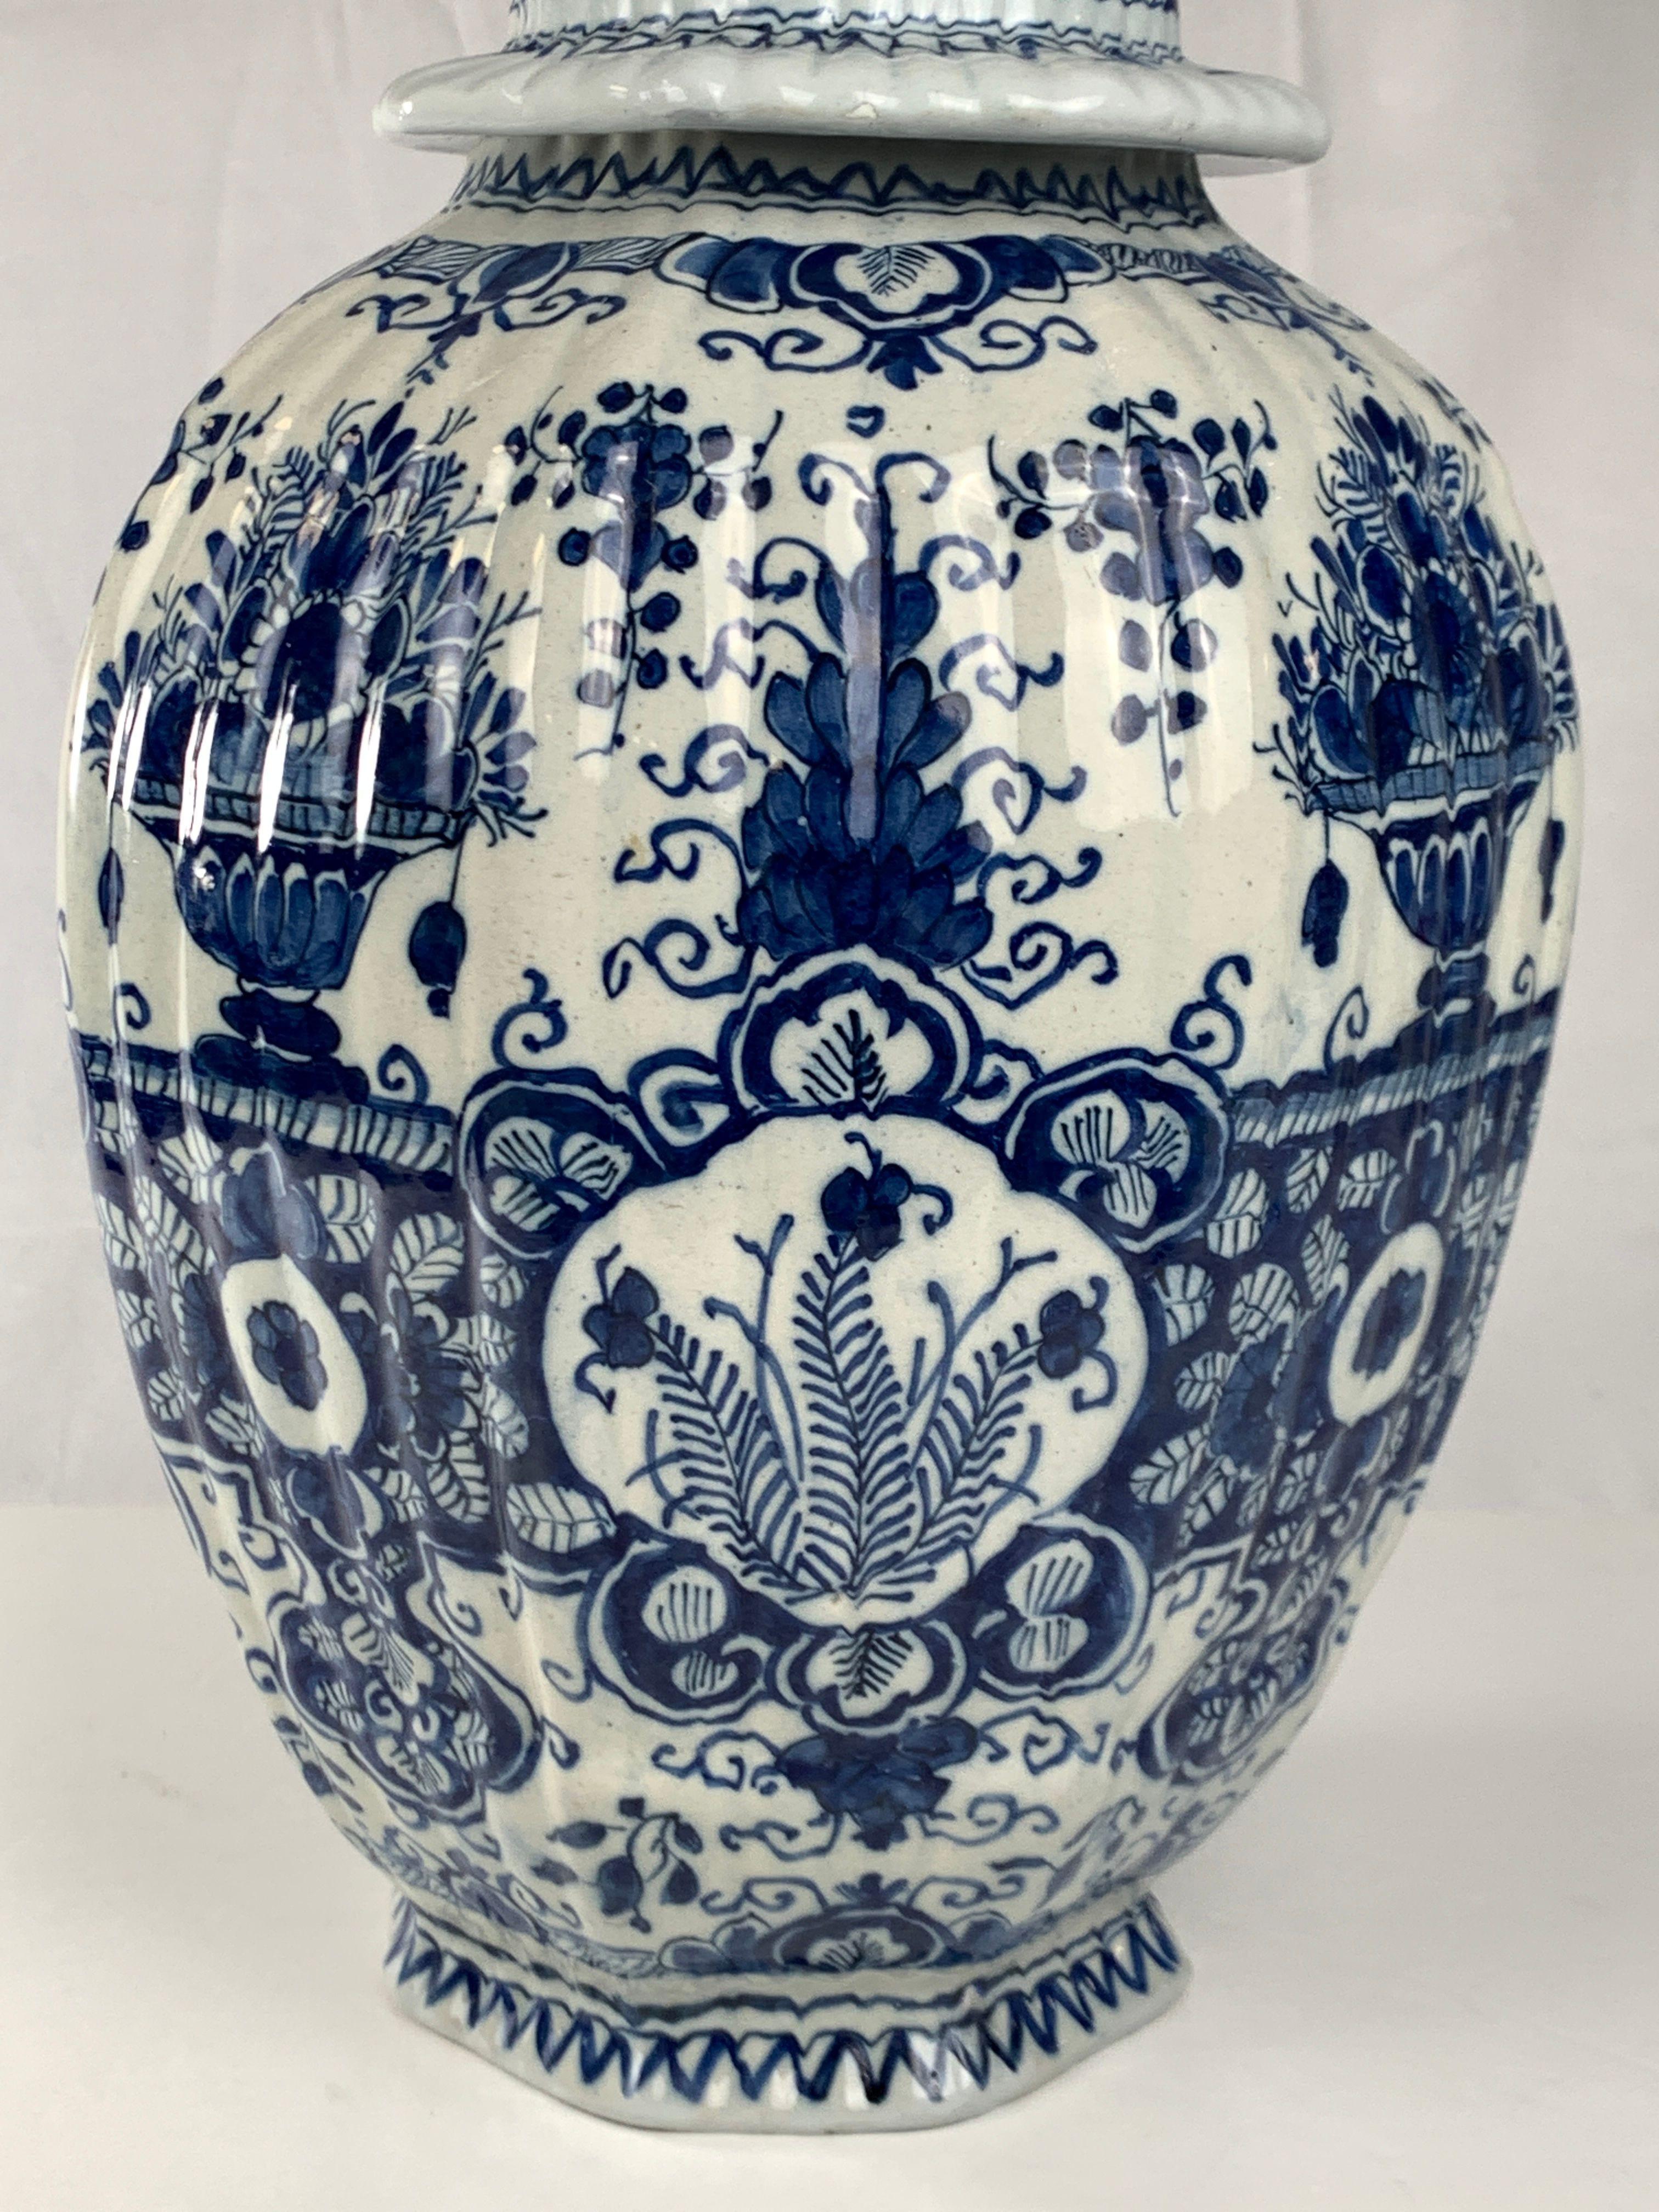 This large blue and white Delft jar is hand-painted, showing exquisite flower-filled baskets on a white tin-glazed ground.
We see sunflowers and tulips overflowing baskets alongside floral decoration with scrolling vines.
The ribbed body sits on a